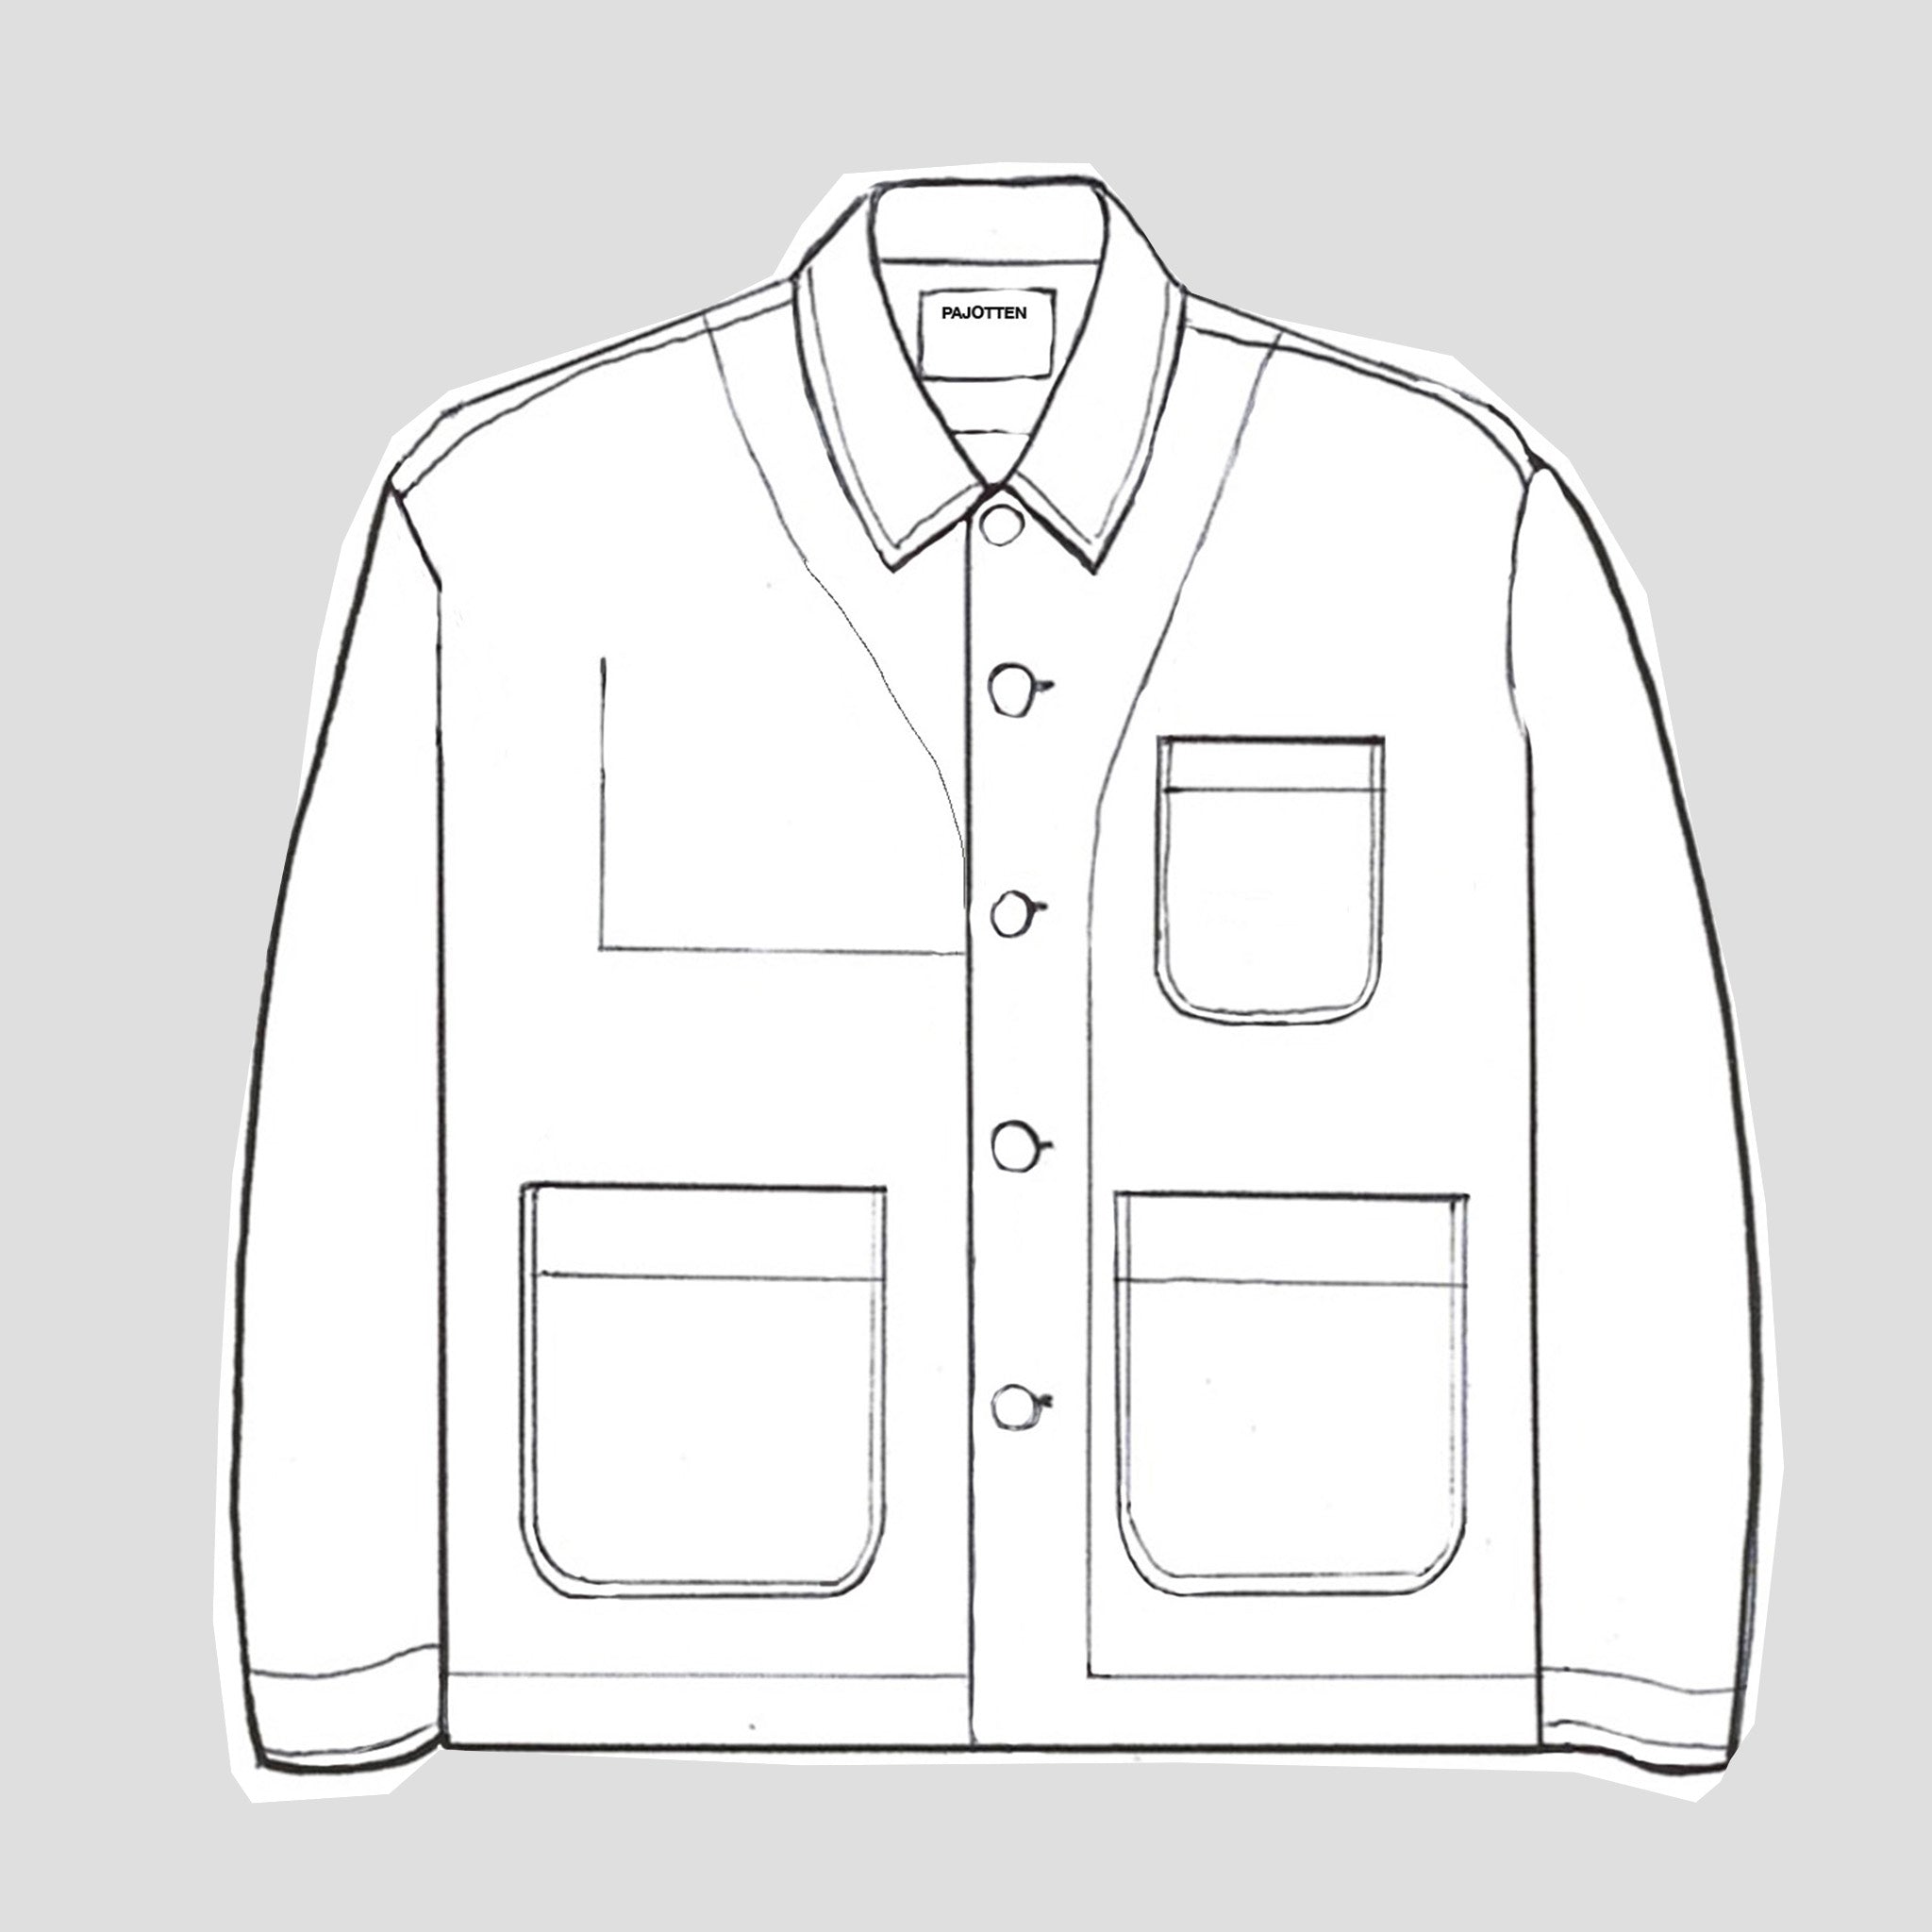 Indigo Chore Jacket made in the UK by new British brand Pajotten video ...